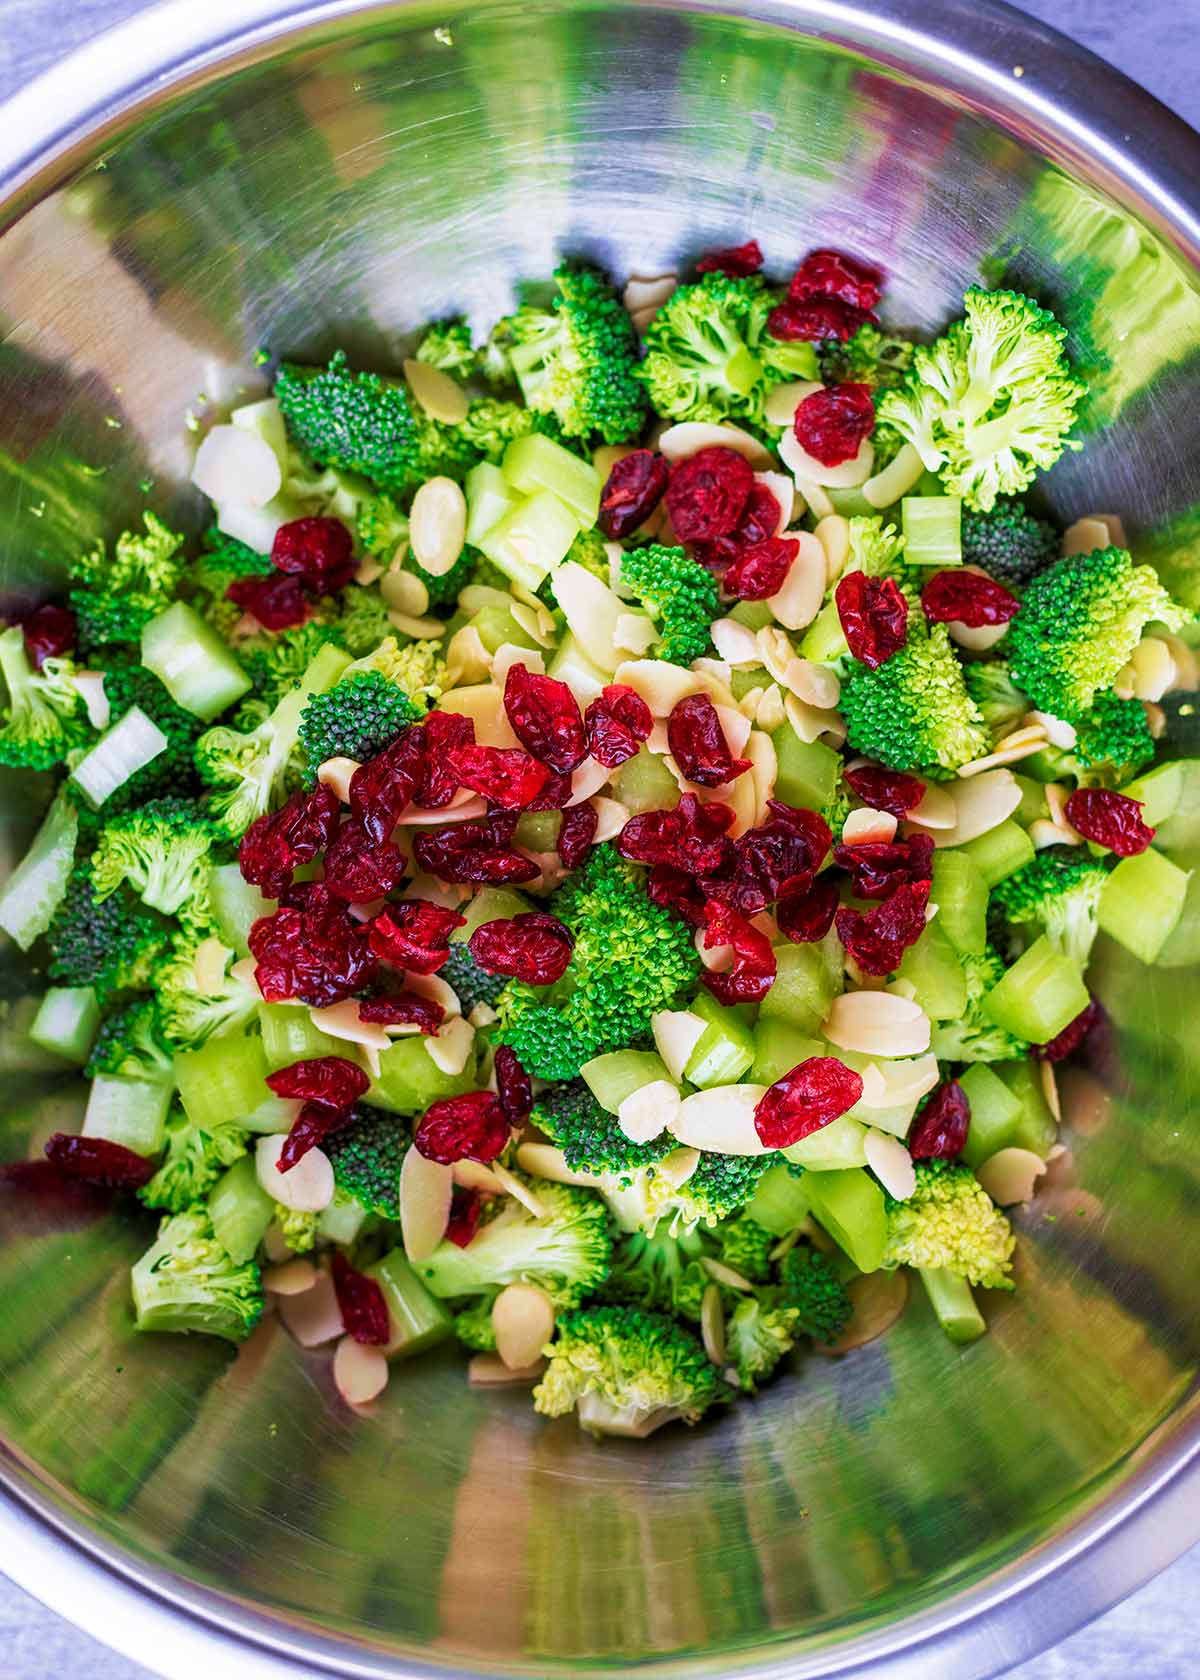 A large mixing bowl containing broccoli florets, cranberries and almonds.